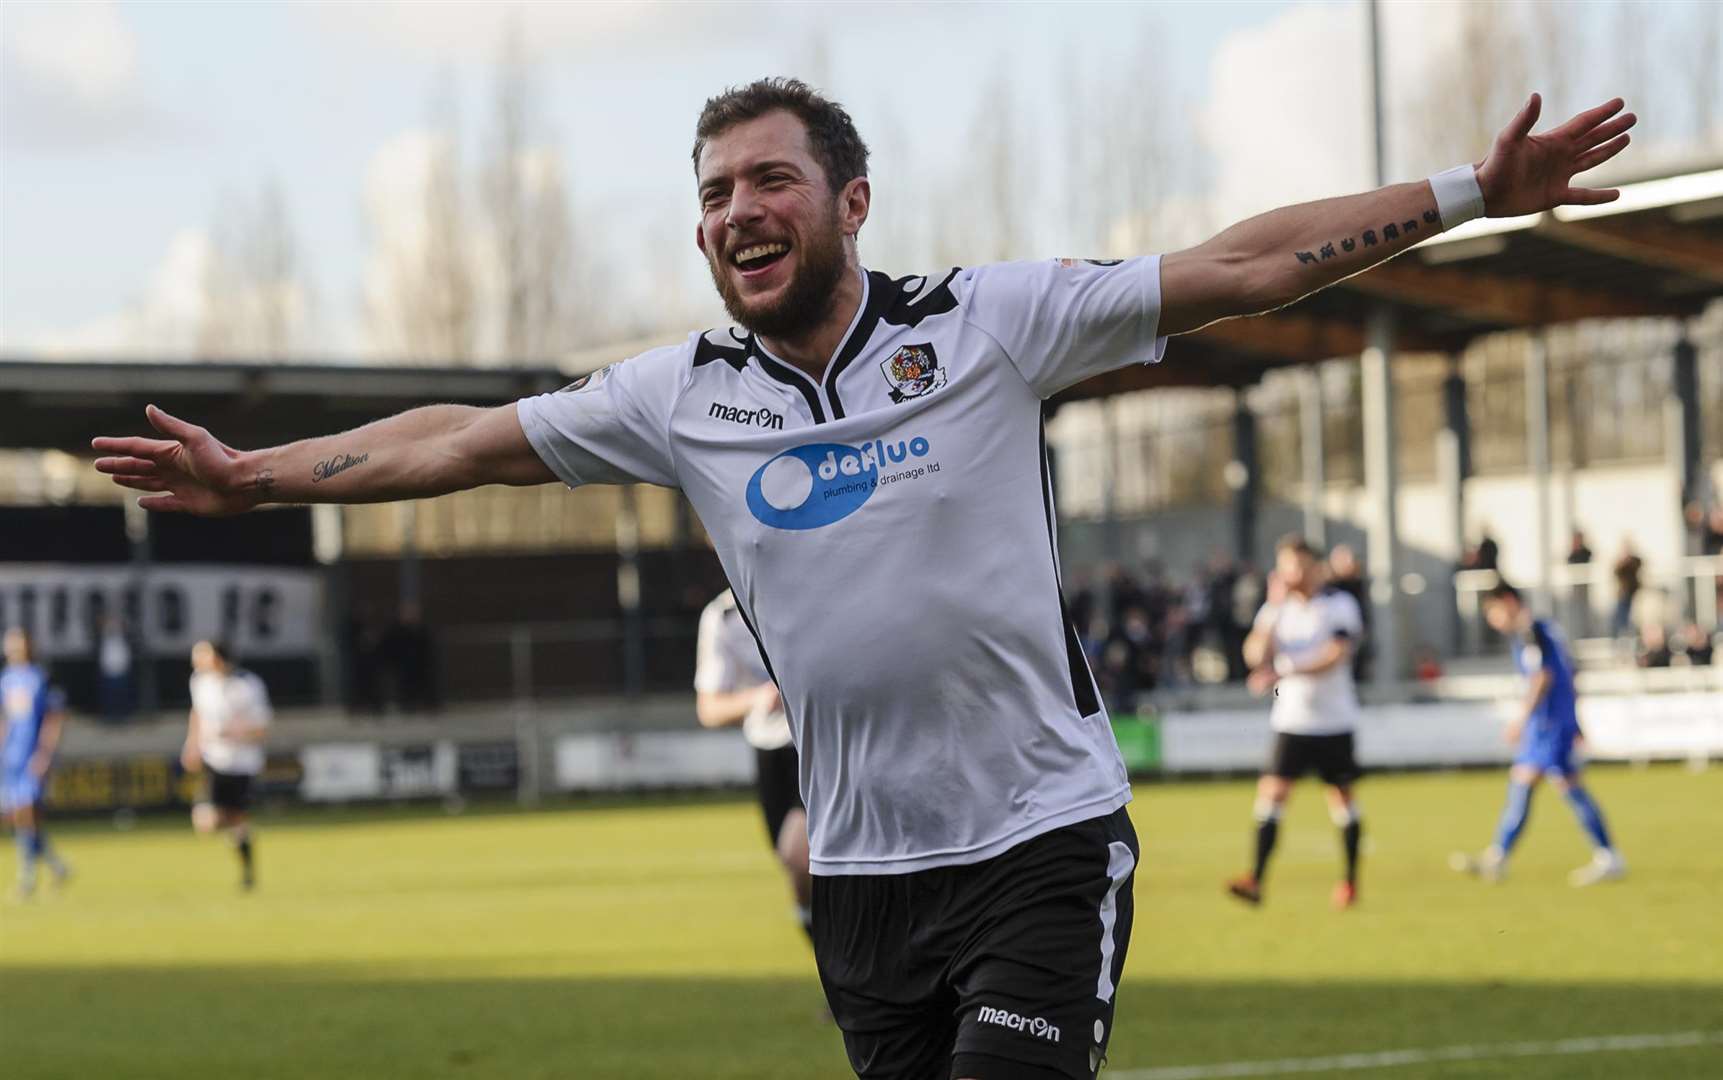 A warm welcome awaits Ryan Hayes back at Dartford Picture: Andy Payton